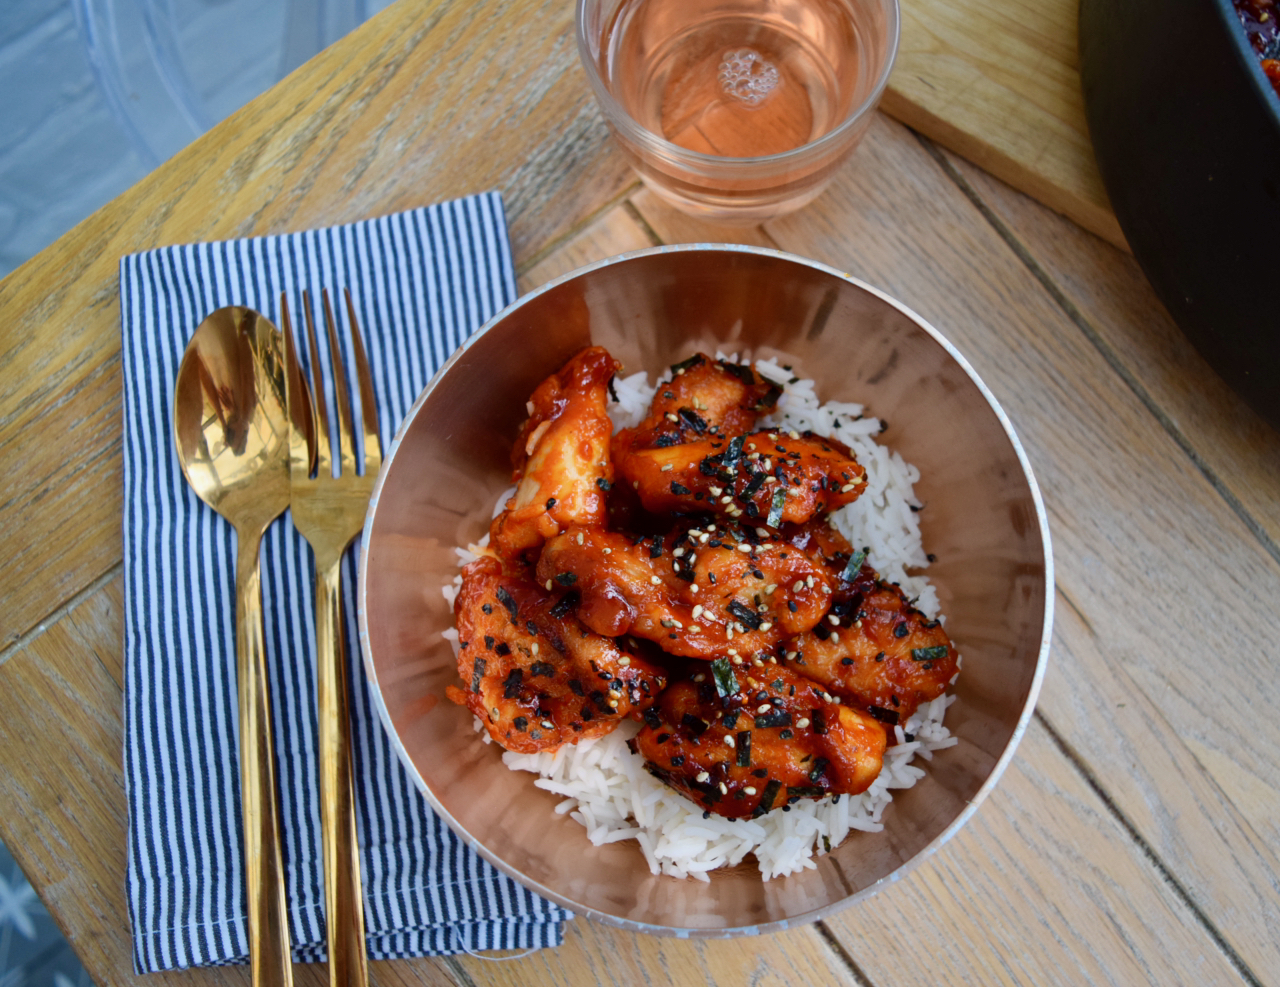 Korean Fried Chicken recipe from Lucy Loves Food Blog